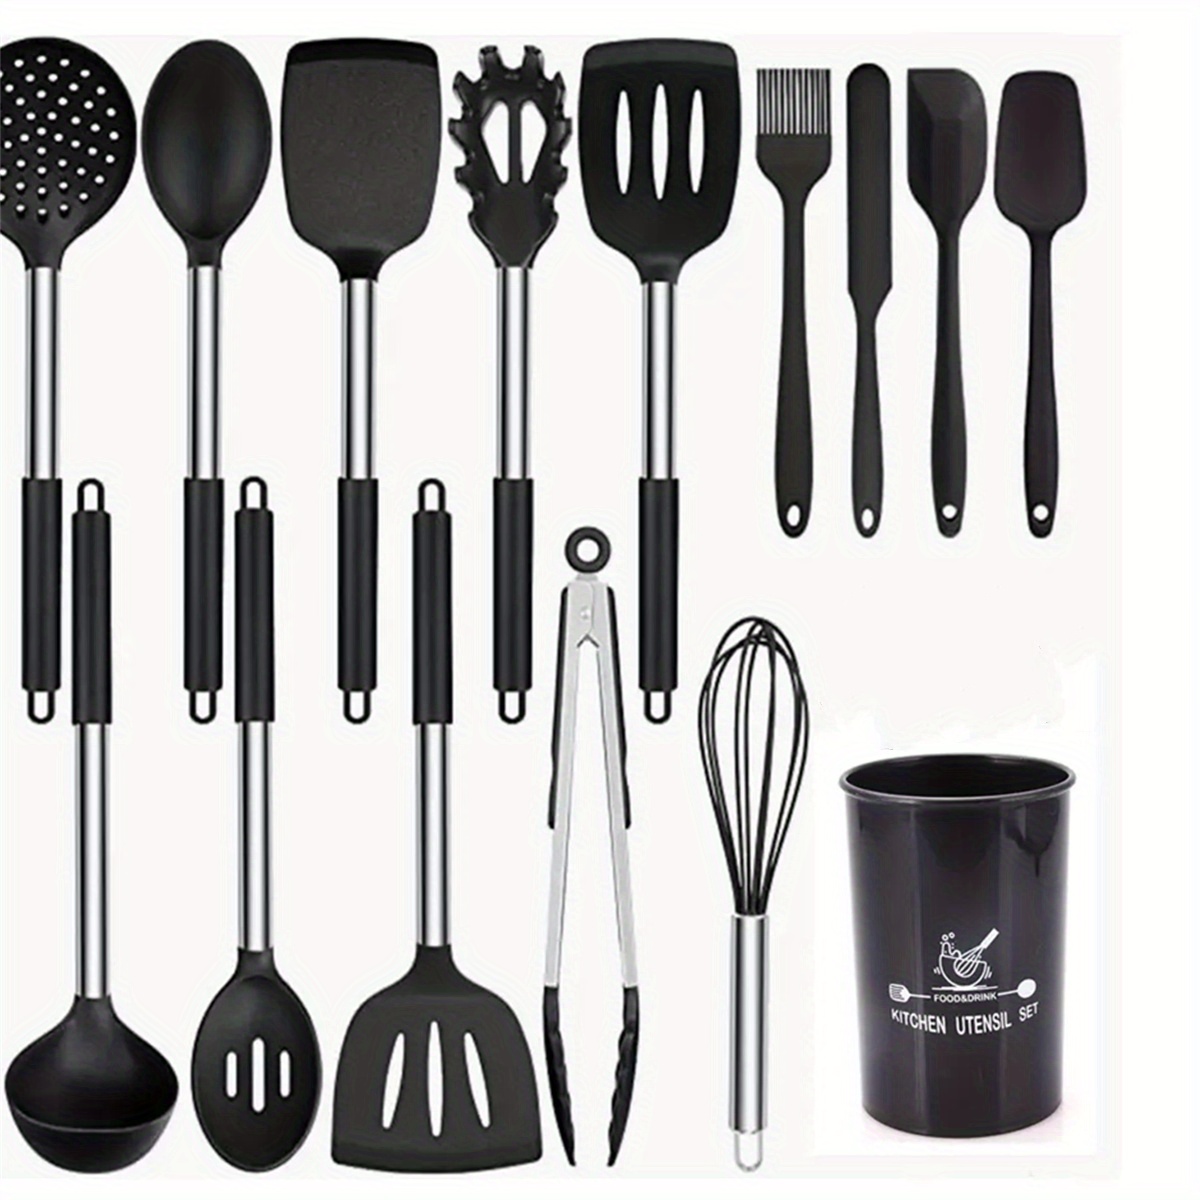 Silicone Cooking Utensils Set Heat Resistant Kitchen Utensils,Turner  Tongs,Spatula,Spoon,Brush,Whisk,Kitchen Utensil Gadgets Tools Set for  Nonstick Cookware,Dishwasher Safe